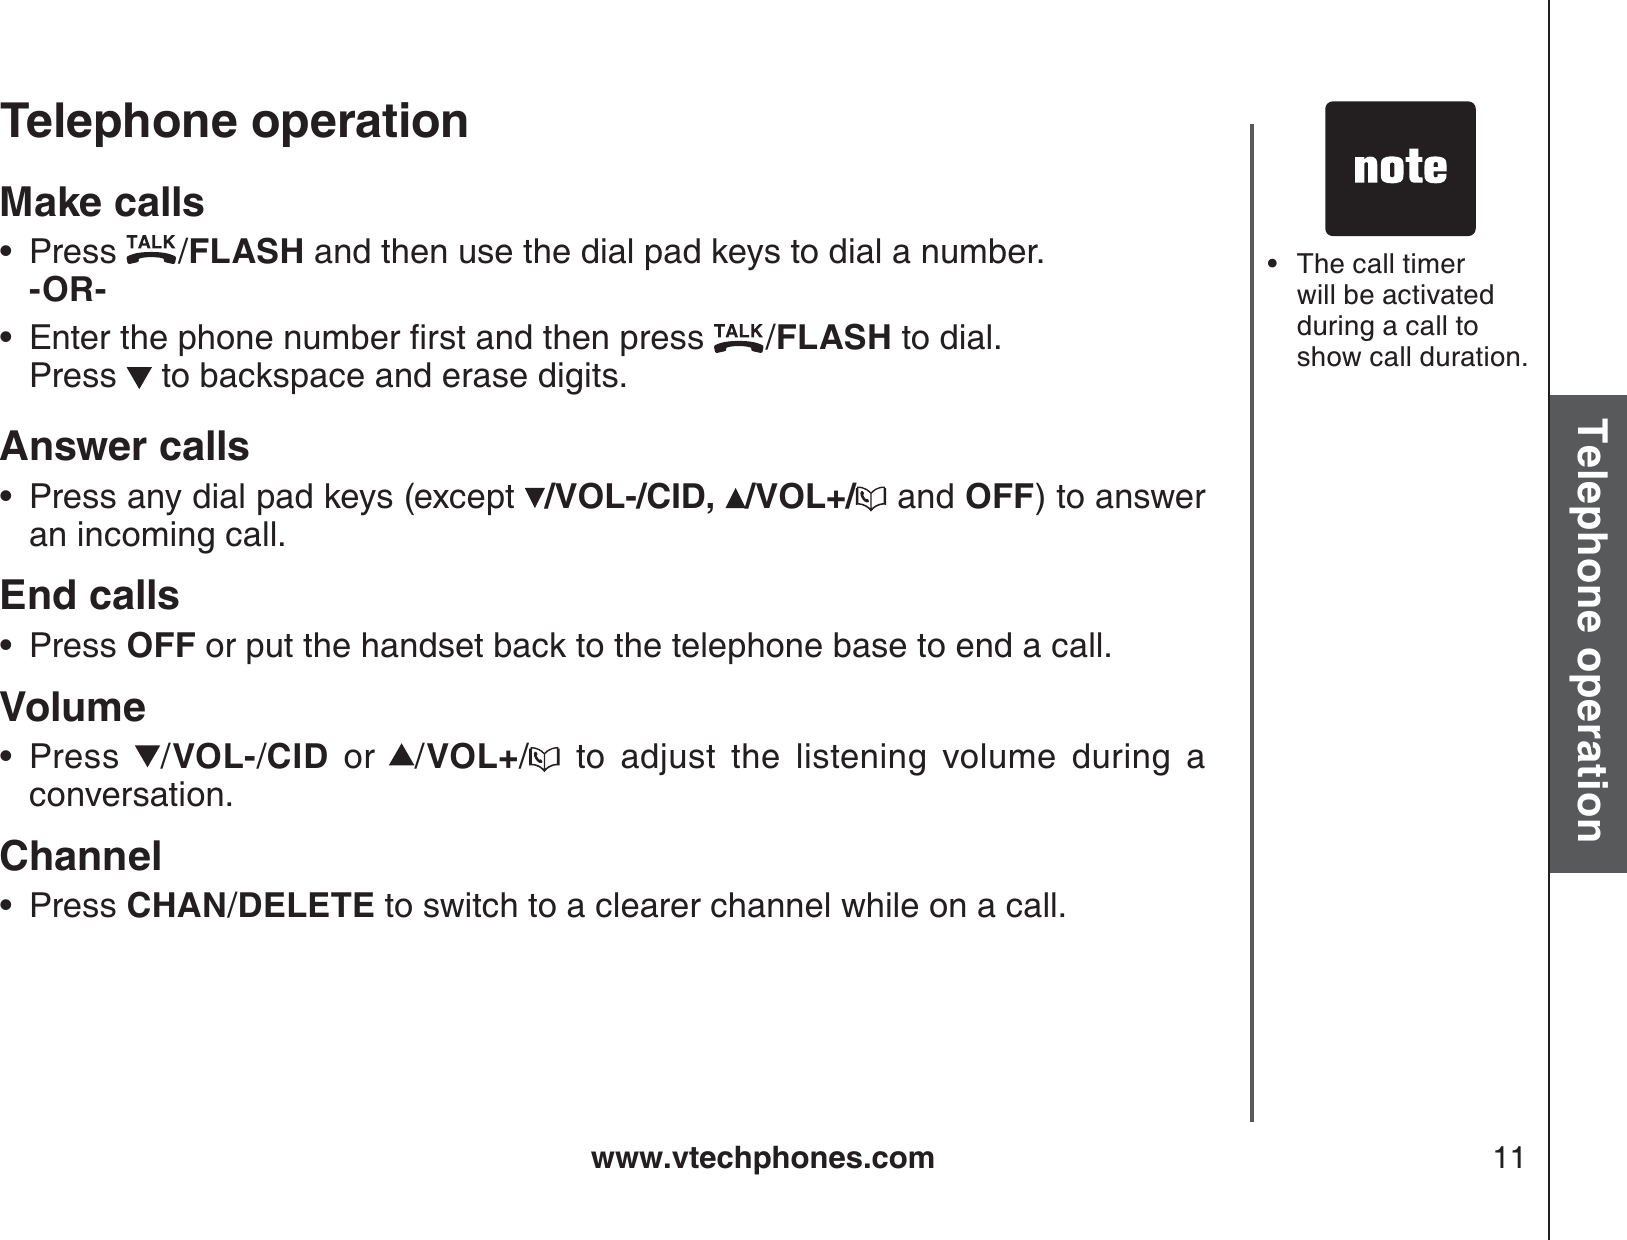 www.vtechphones.com 11Basic operationTelephone operationTelephone operationMake callsPress  /FLASH and then use the dial pad keys to dial a number.   -OR-         &apos;PVGTVJGRJQPGPWODGTſTUVCPFVJGPRTGUU /FLASH to dial.   Press   to backspace and erase digits.Answer callsPress any dial pad keys (except  /VOL-/CID, /VOL+/  and OFF) to answer an incoming call.End calls  Press OFF or put the handset back to the telephone base to end a call.VolumePress  /VOL-/CID or /VOL+/ to adjust the listening volume during a conversation.ChannelPress CHAN/DELETE to switch to a clearer channel while on a call.••••••The call timer will be activated during a call to show call duration.•